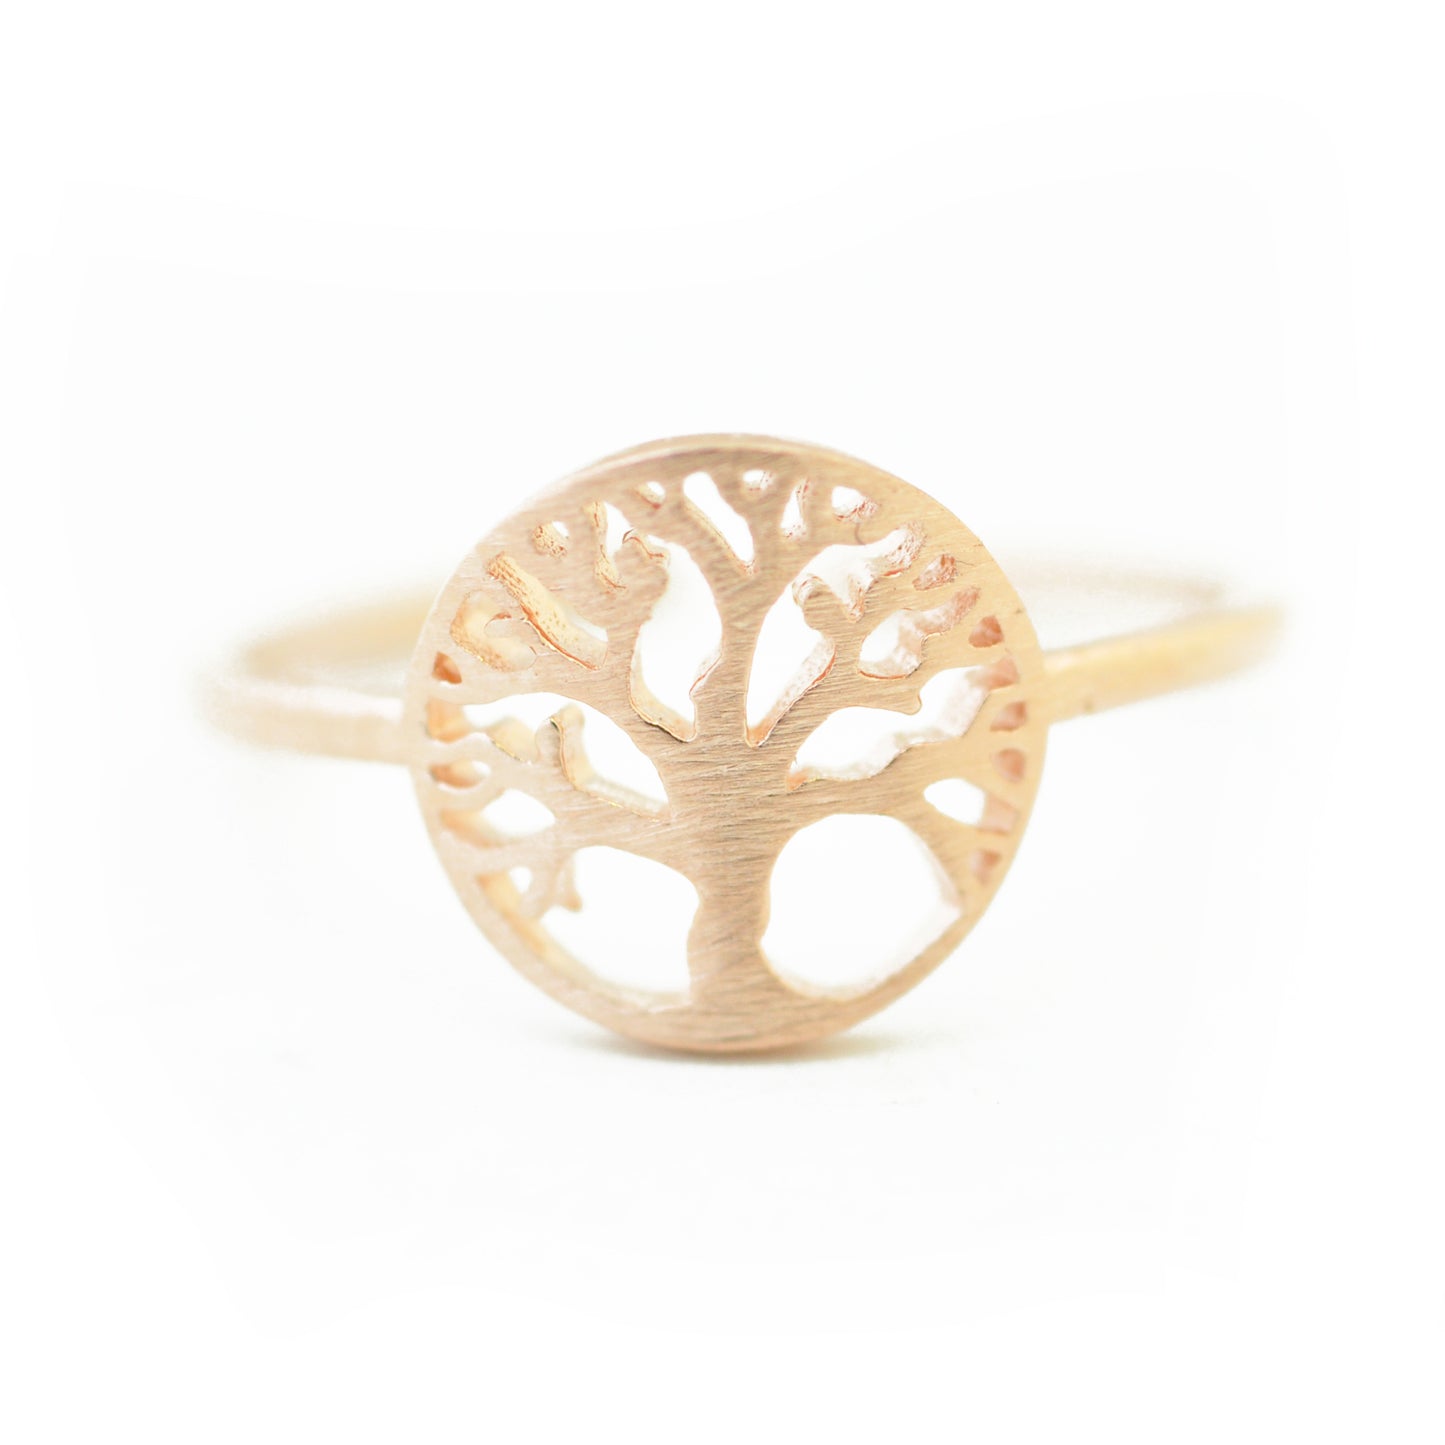 Ring of life tree / size adjustable